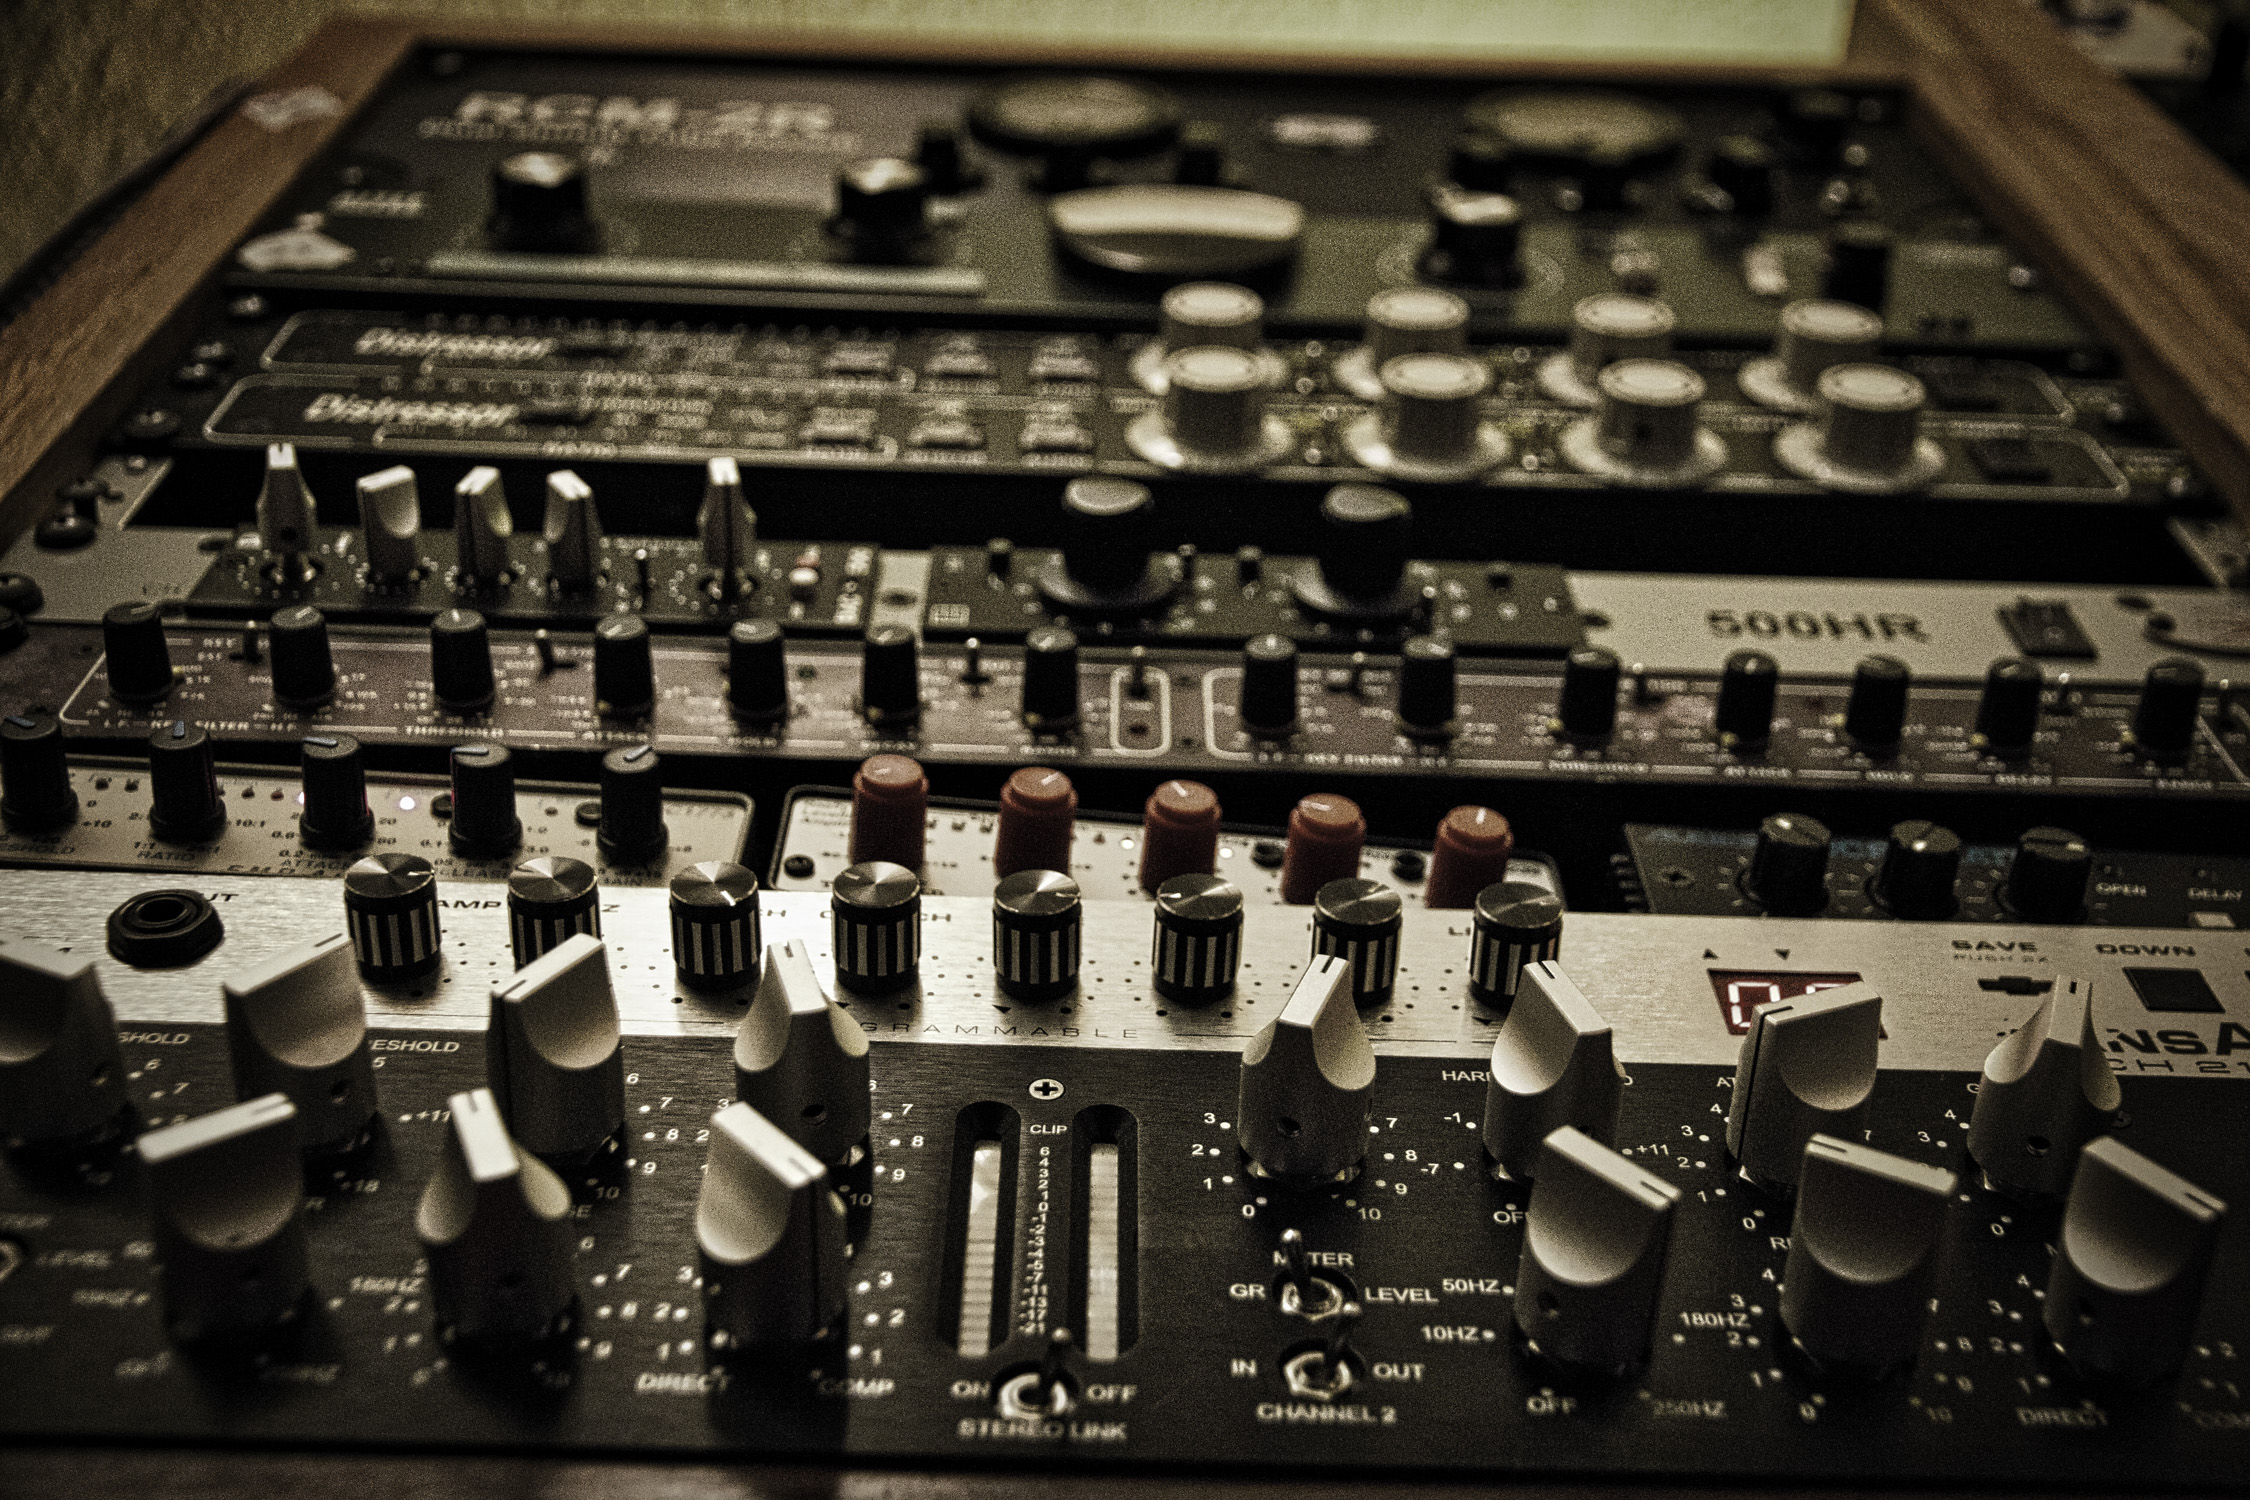 Compressors, expanders, and gates are pivotal to good music production